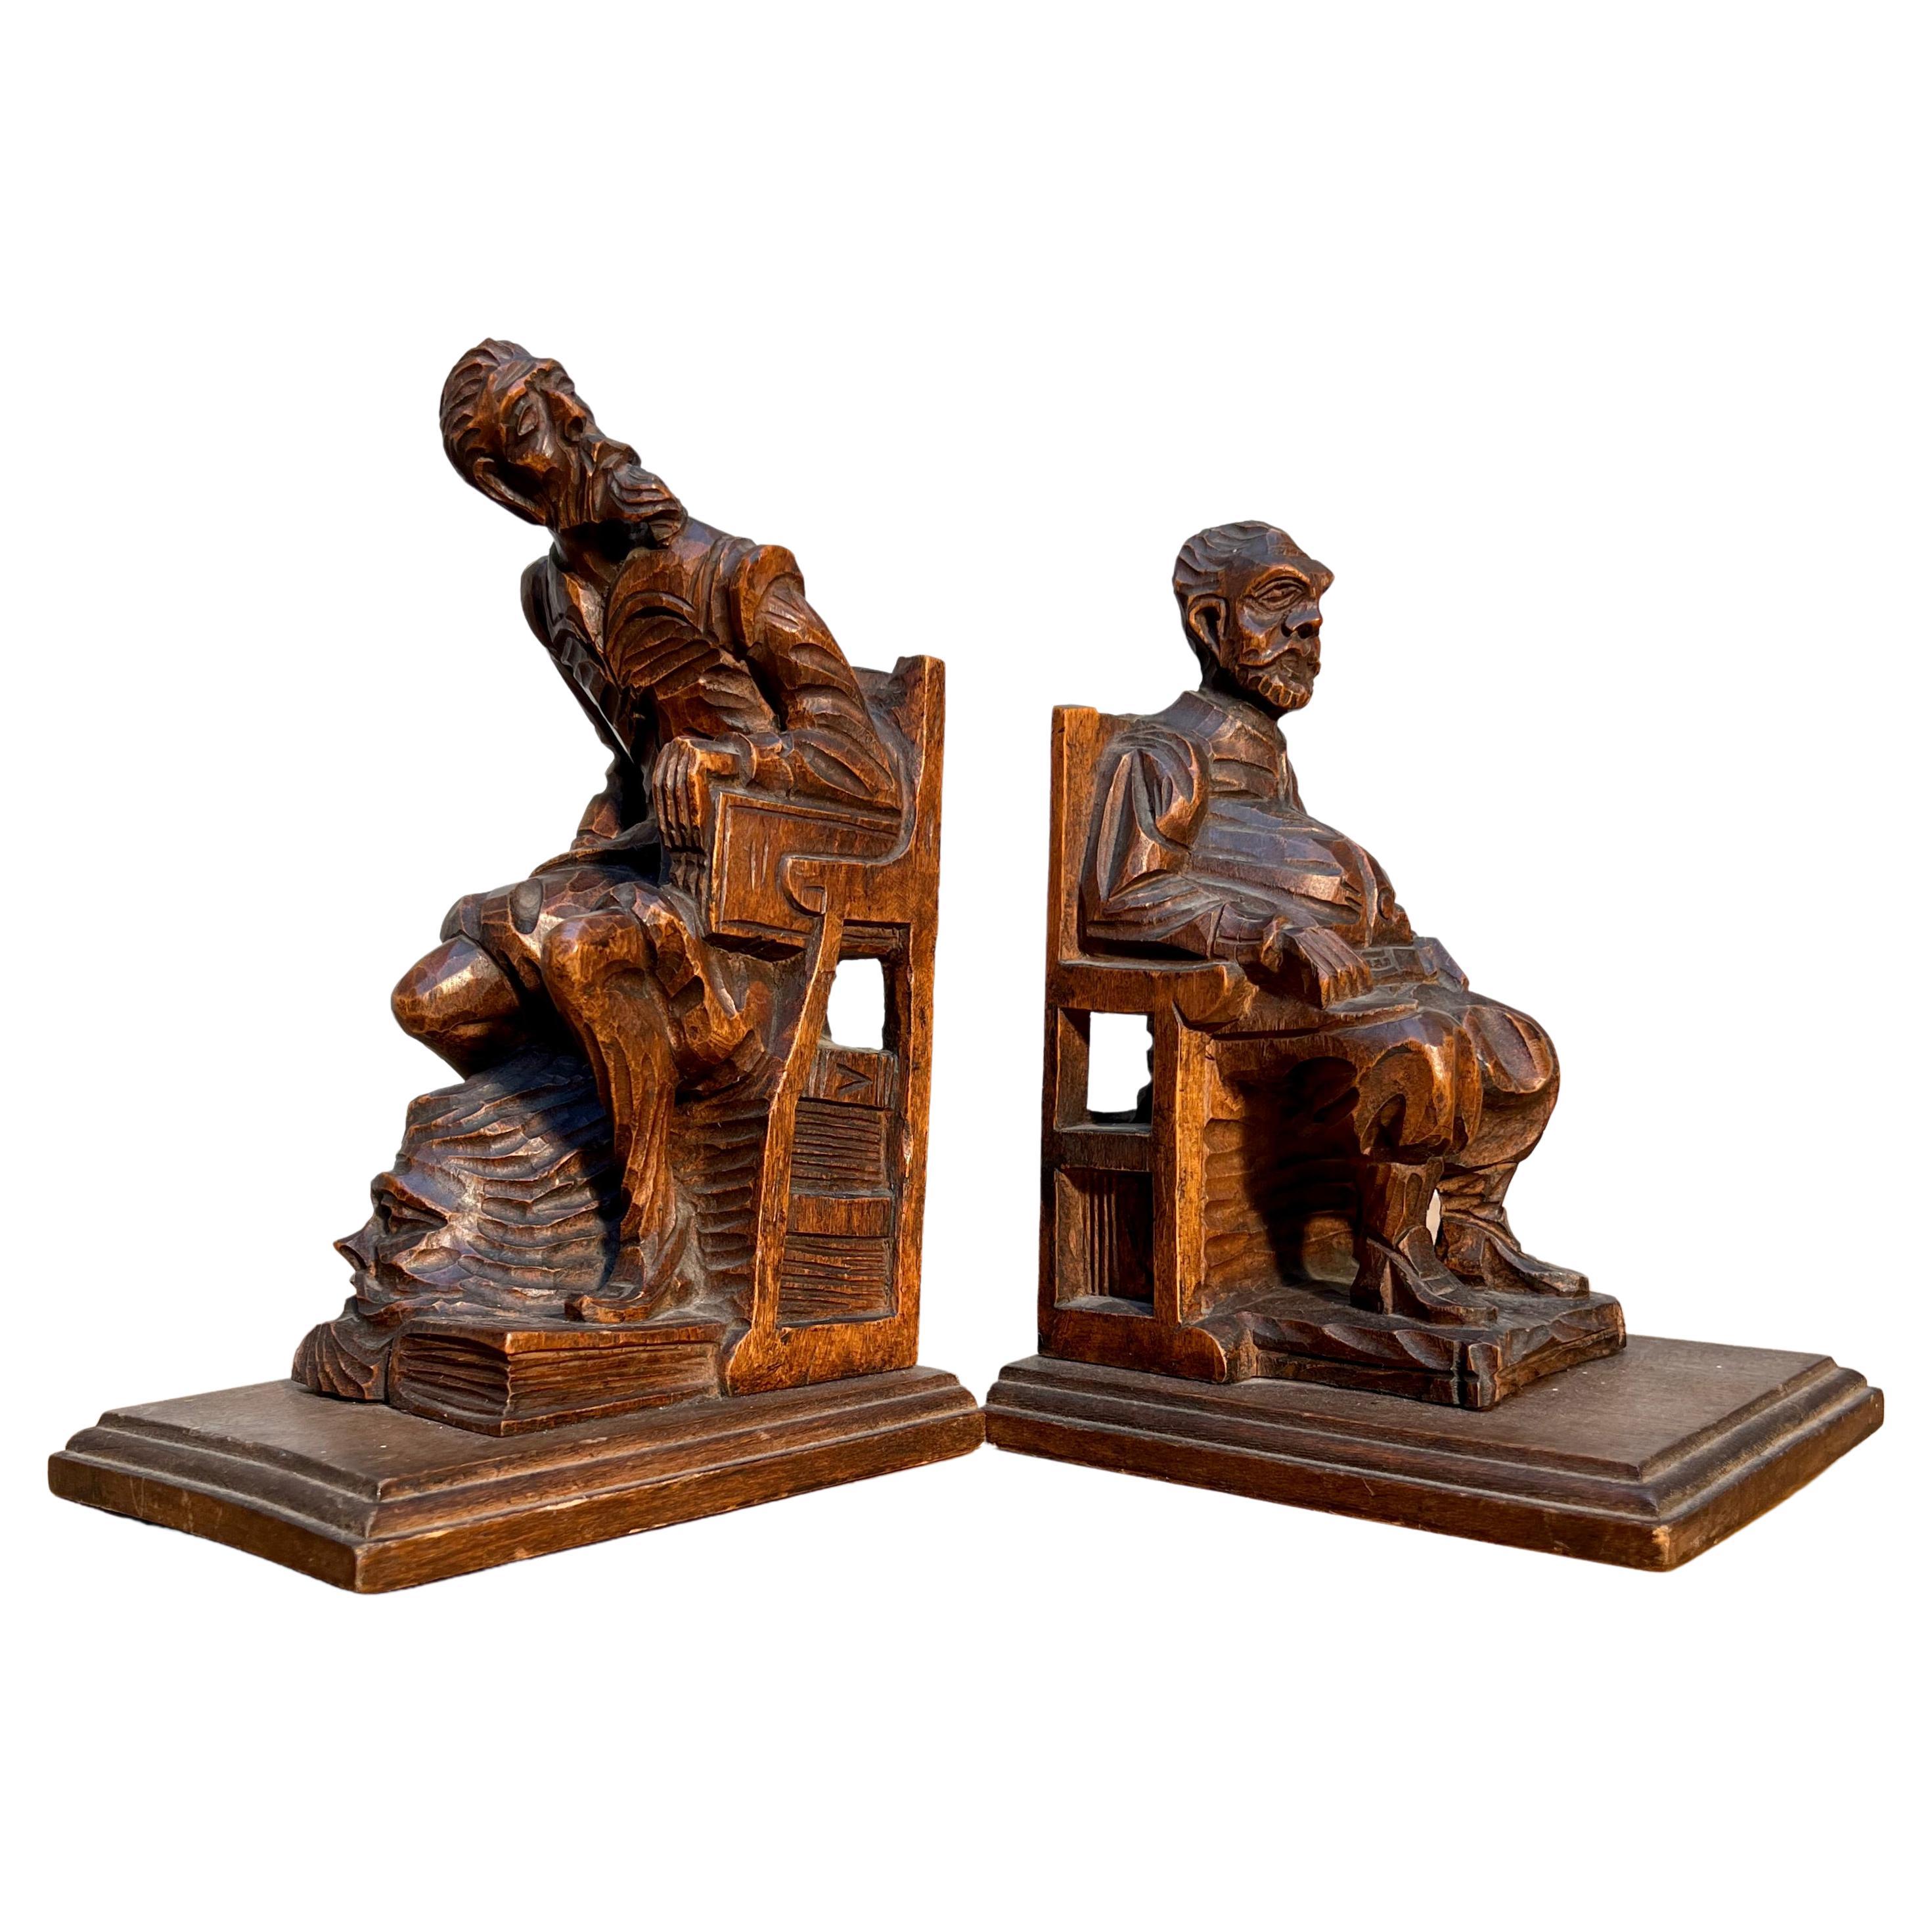 Good Size Pair of Hand Carved & Patinated Don Quixote and Sancho Panza Bookends